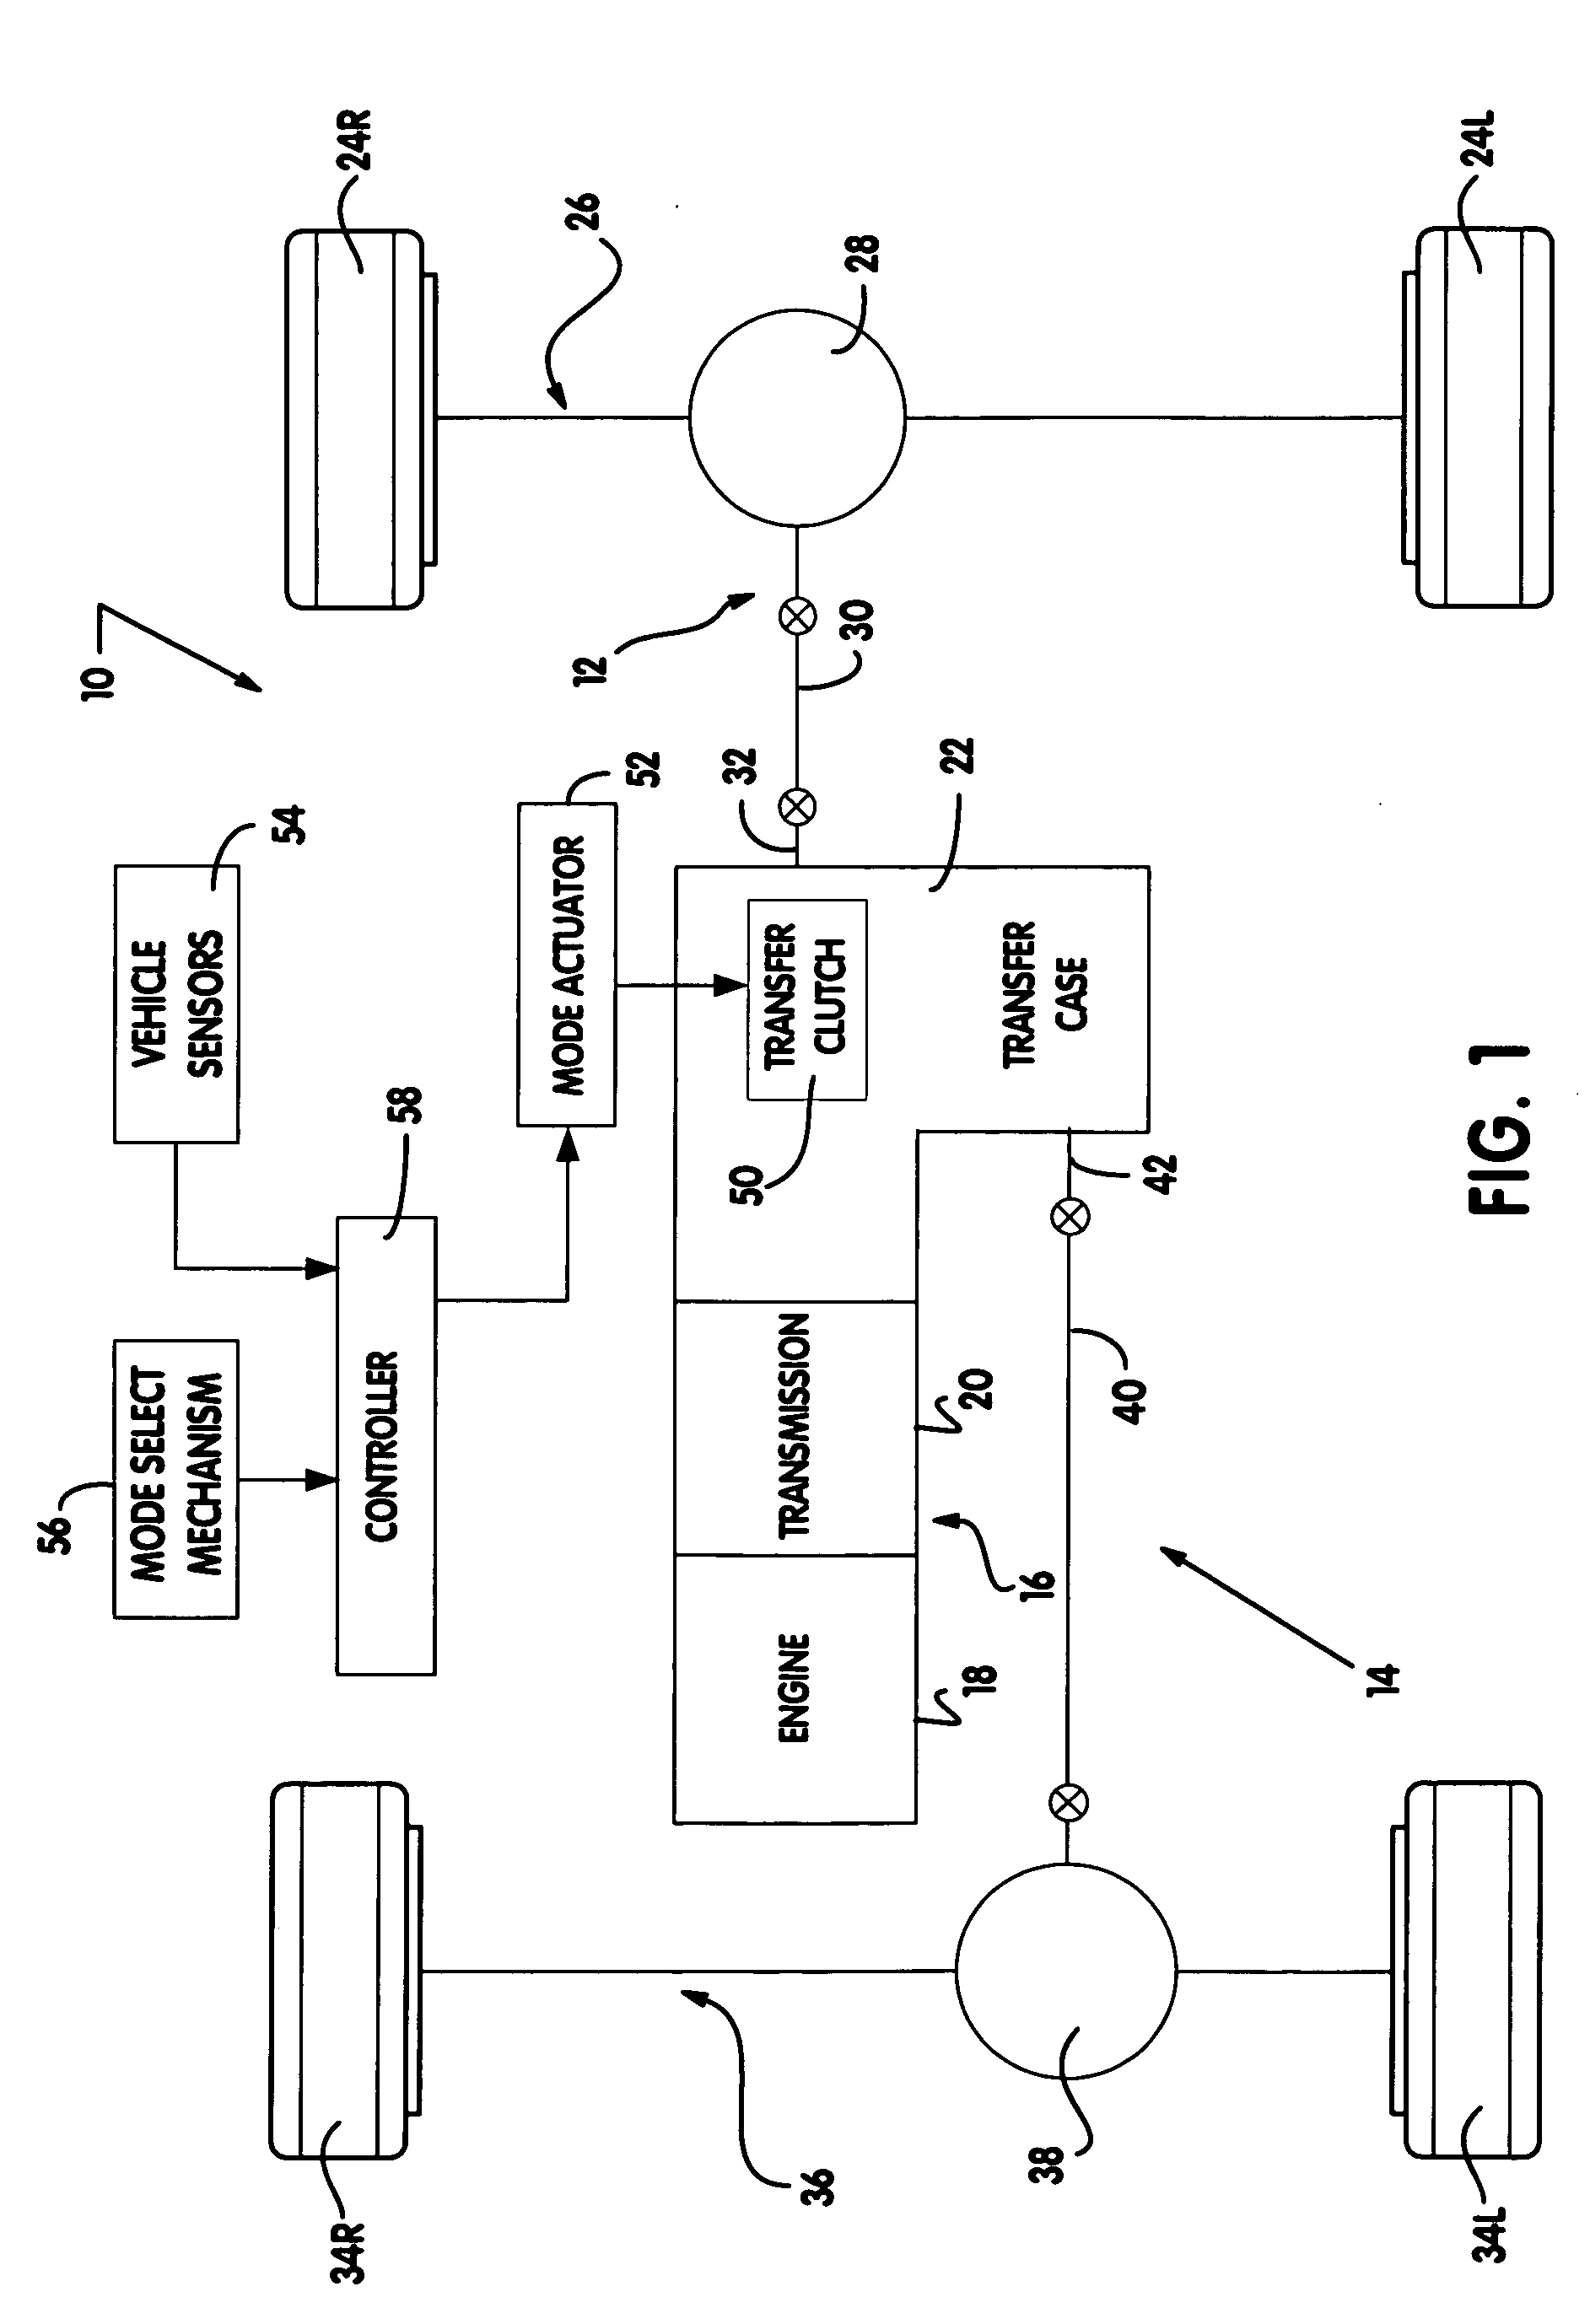 Torque vectoring drive mechanism having a power sharing control system